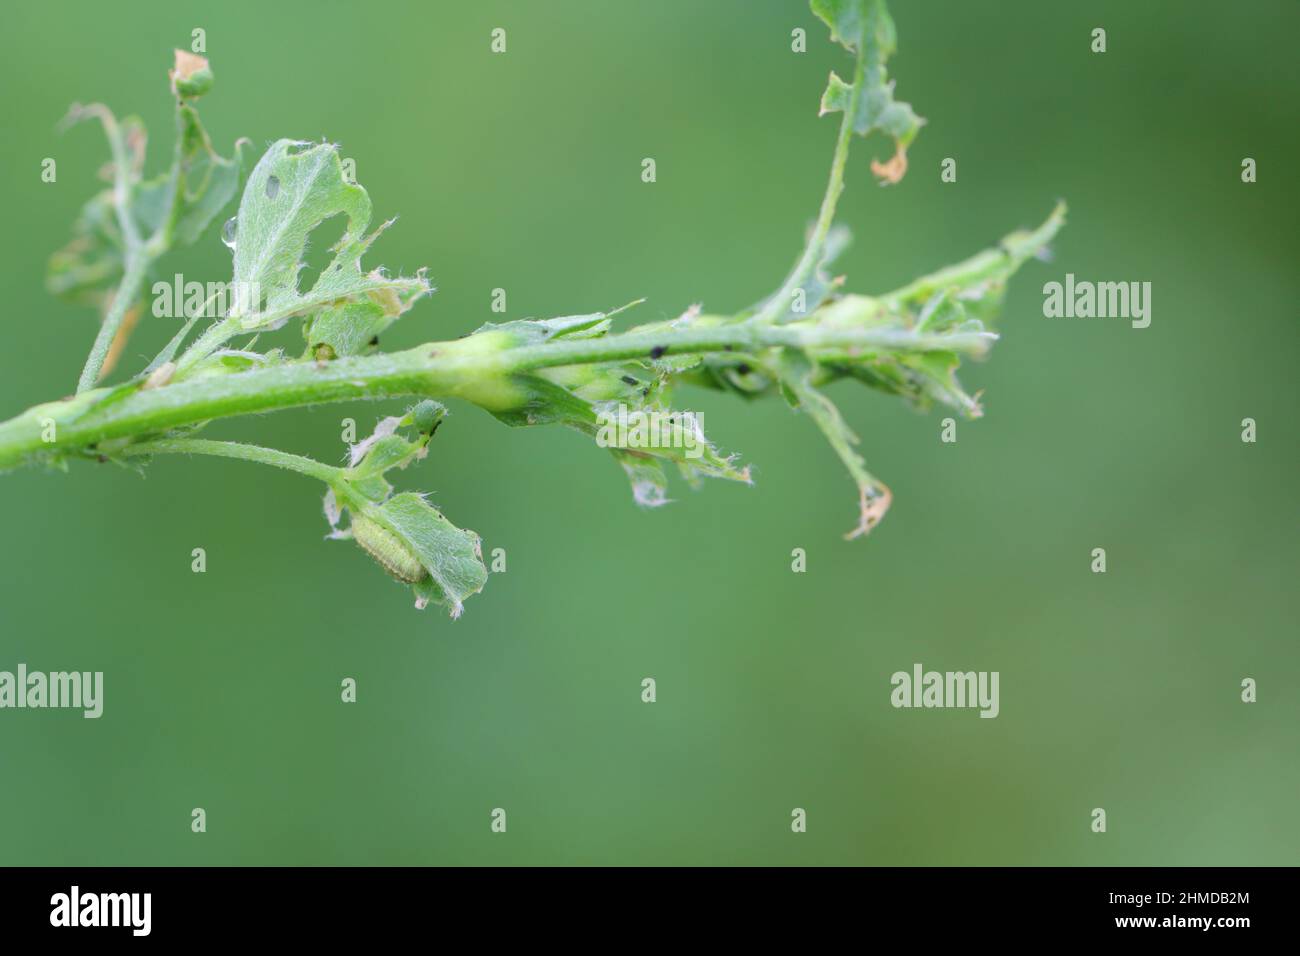 Alfalfa plant damaged by larvae of Lucerne weevil - Hypera postica. It is a dangerous pest of this crop plant. Stock Photo